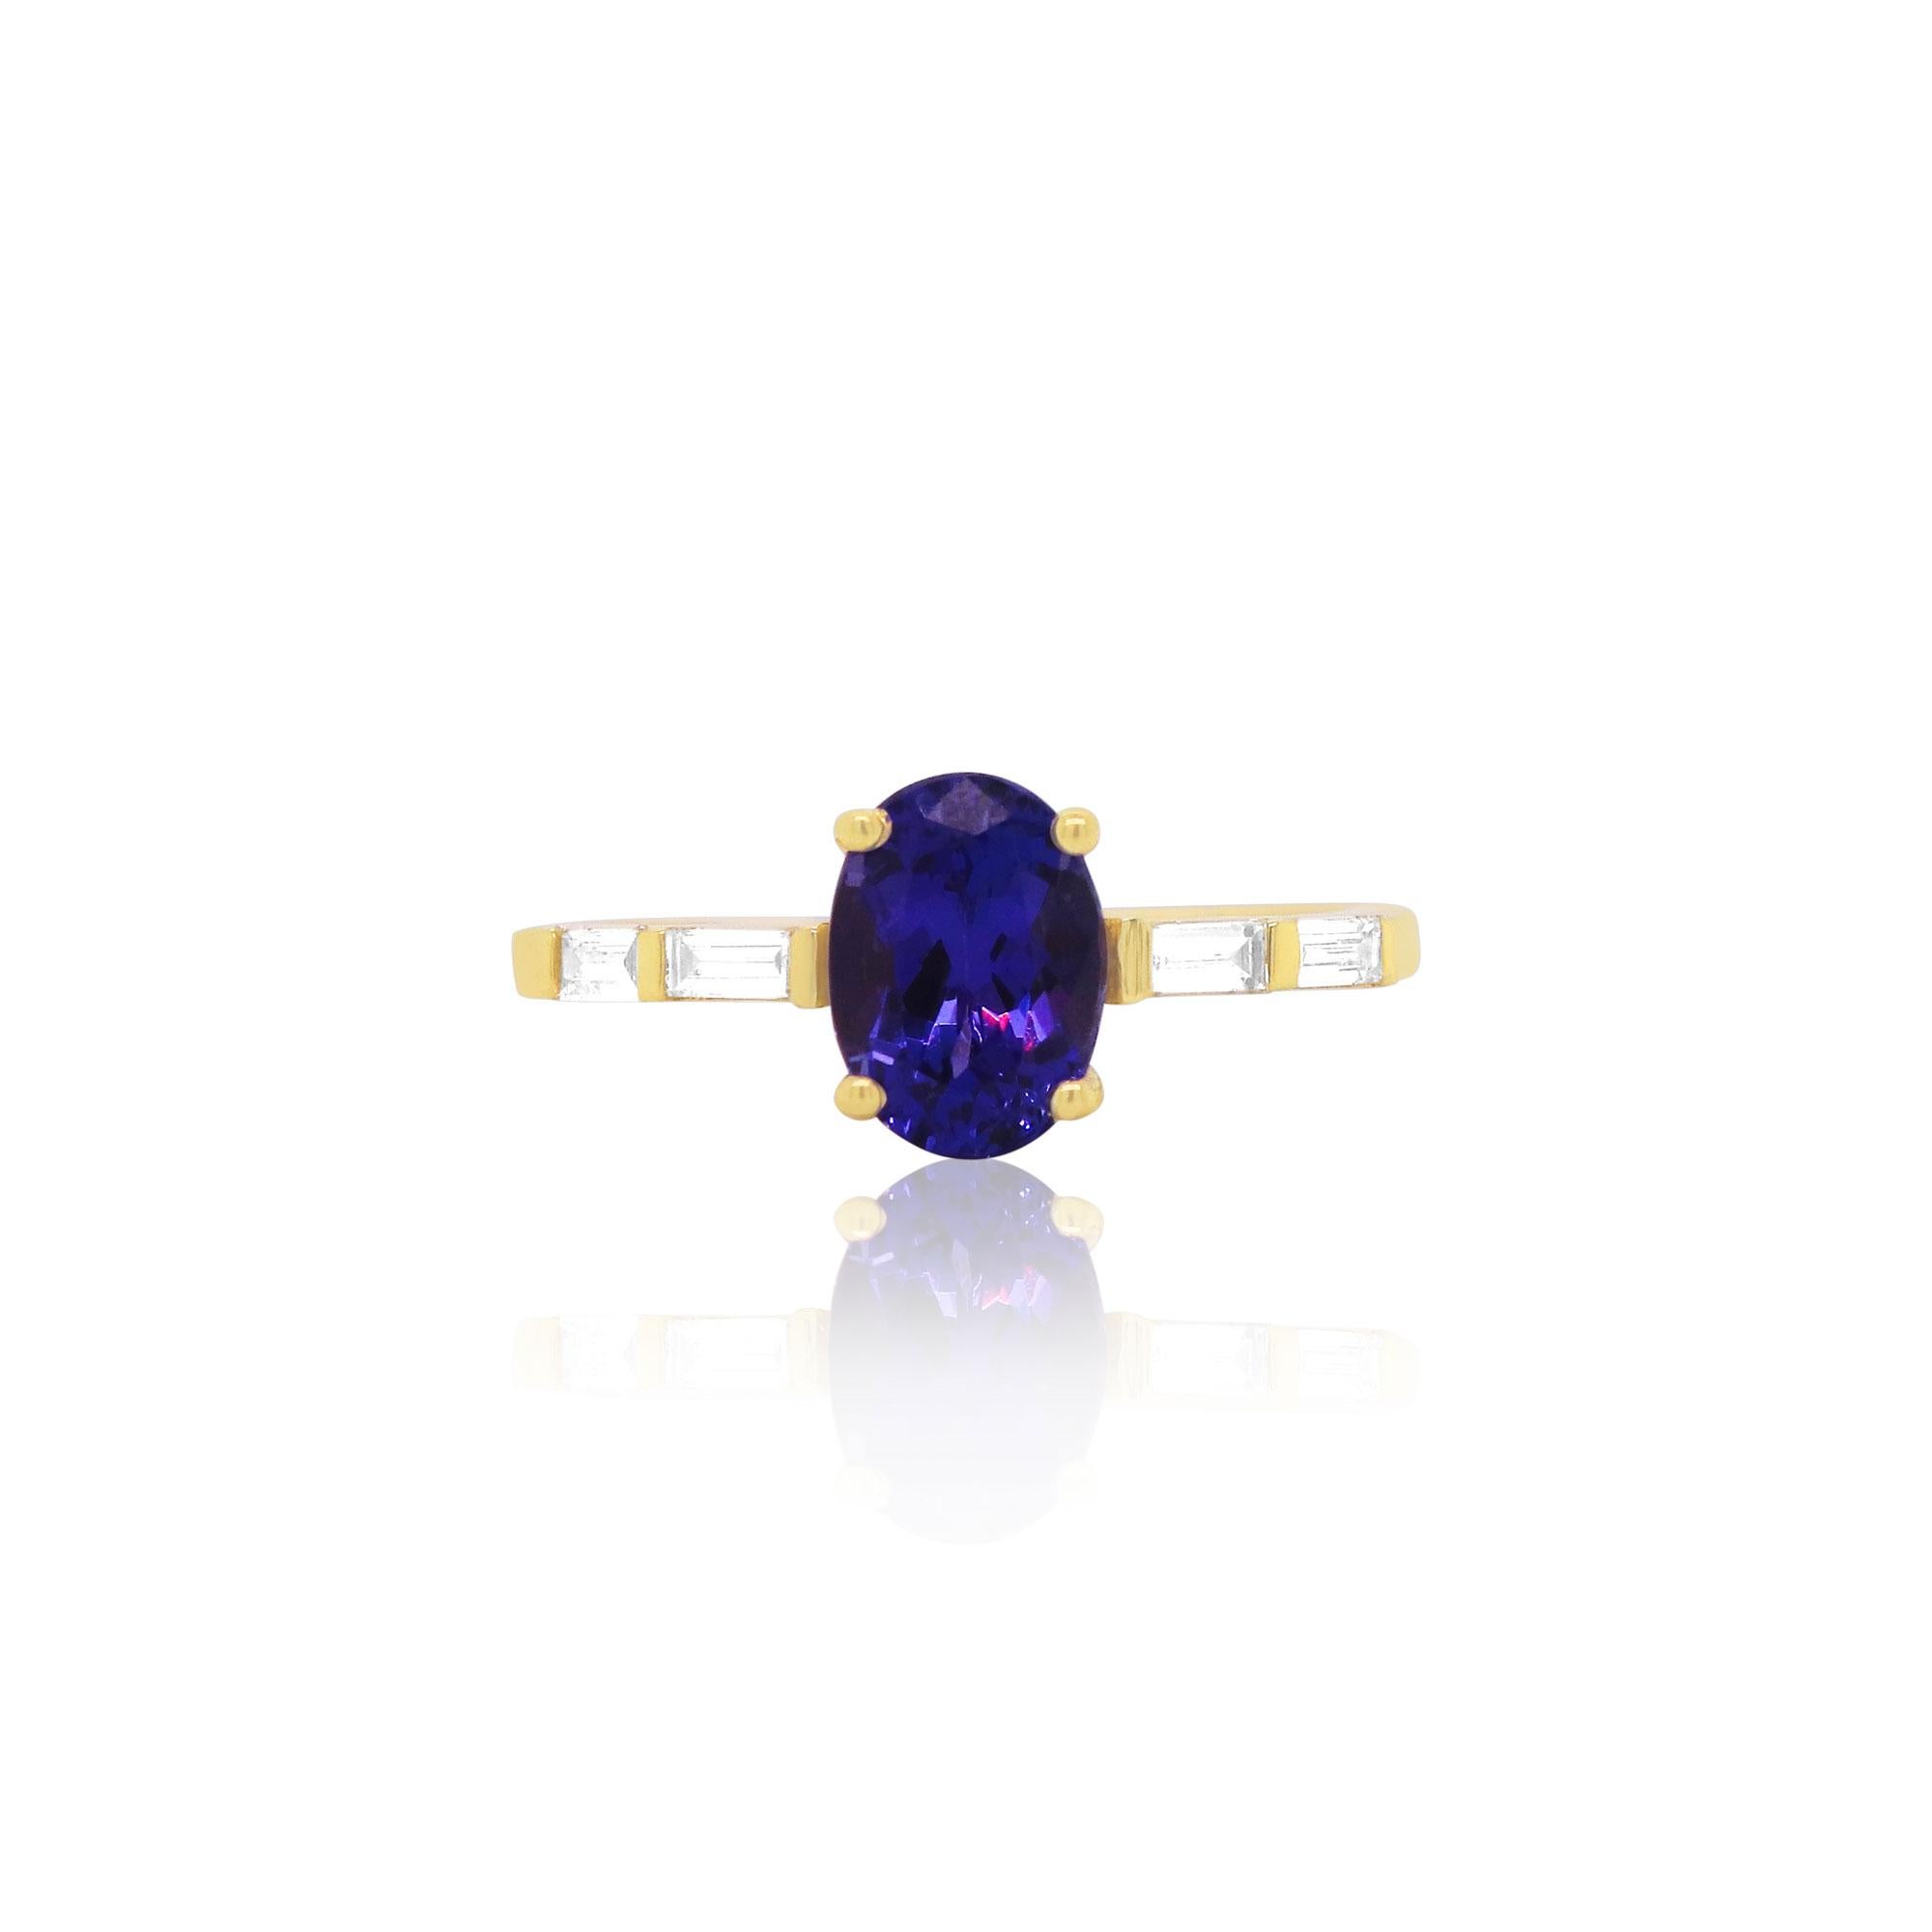 2.10Ct Trillion Cut Blue Tanzanite Women's  Engagement Ring 14K Yellow Gold Over 